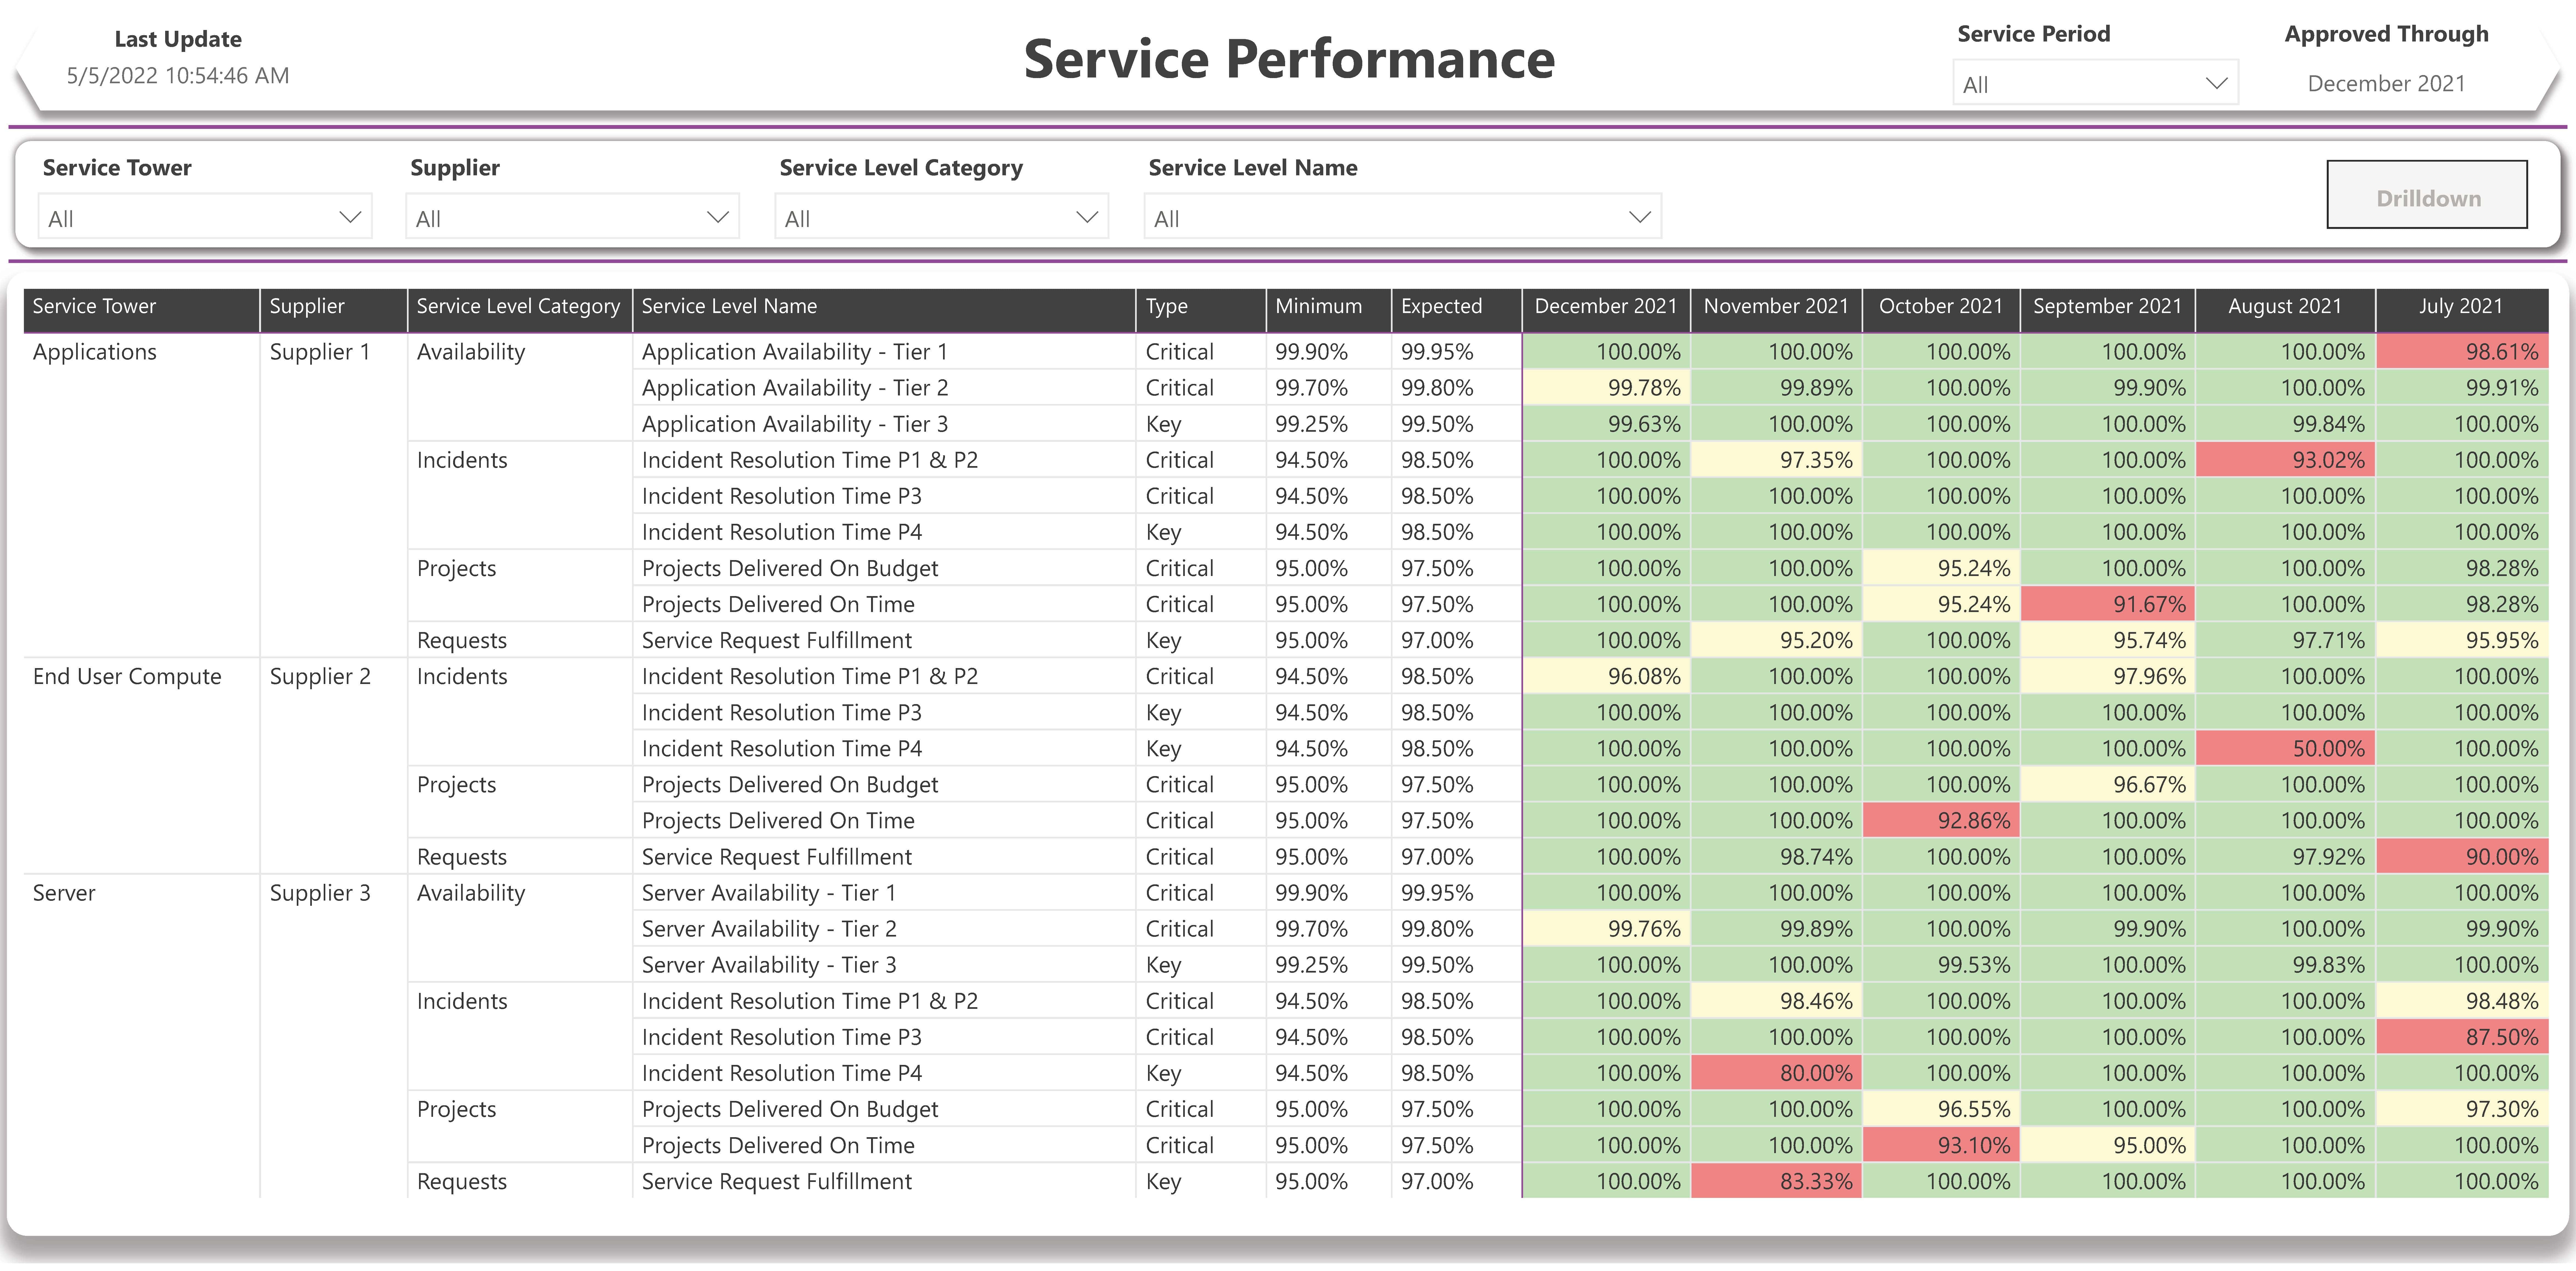 Service Performance - Header Section